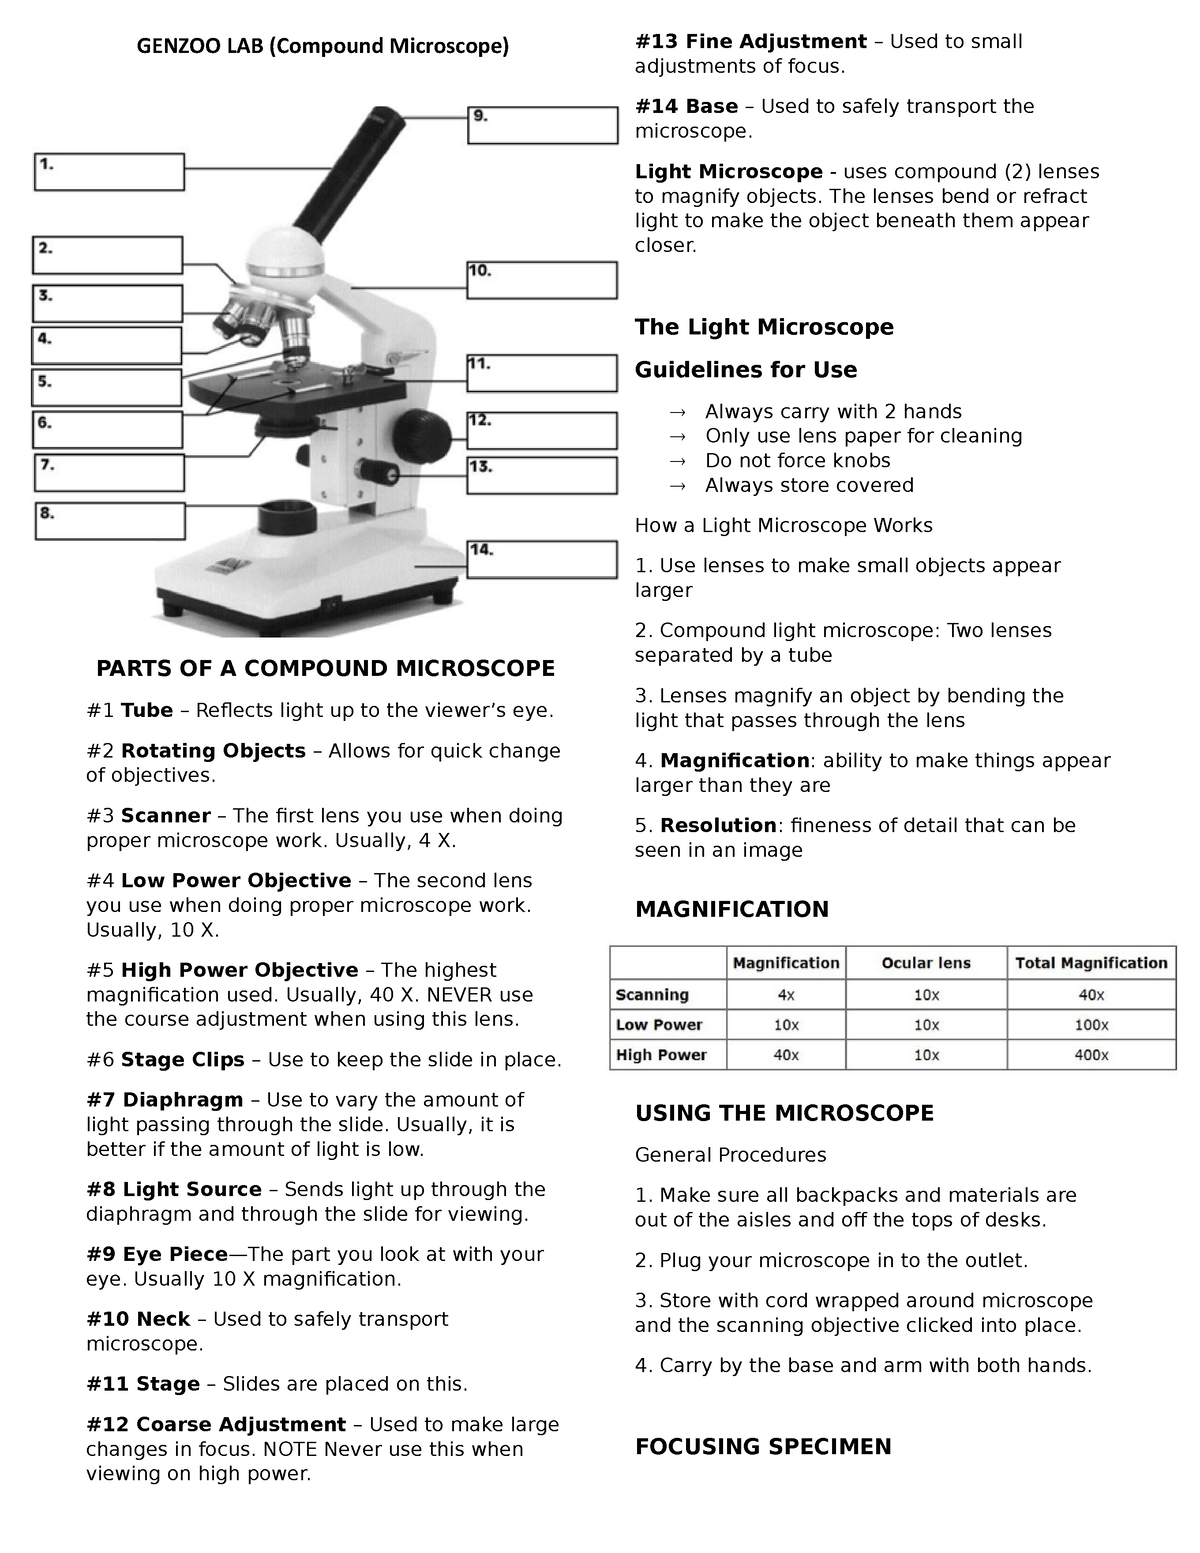 LAB Notes (Compound Microsope) - GENZOO LAB (Compound Microscope) PARTS ...